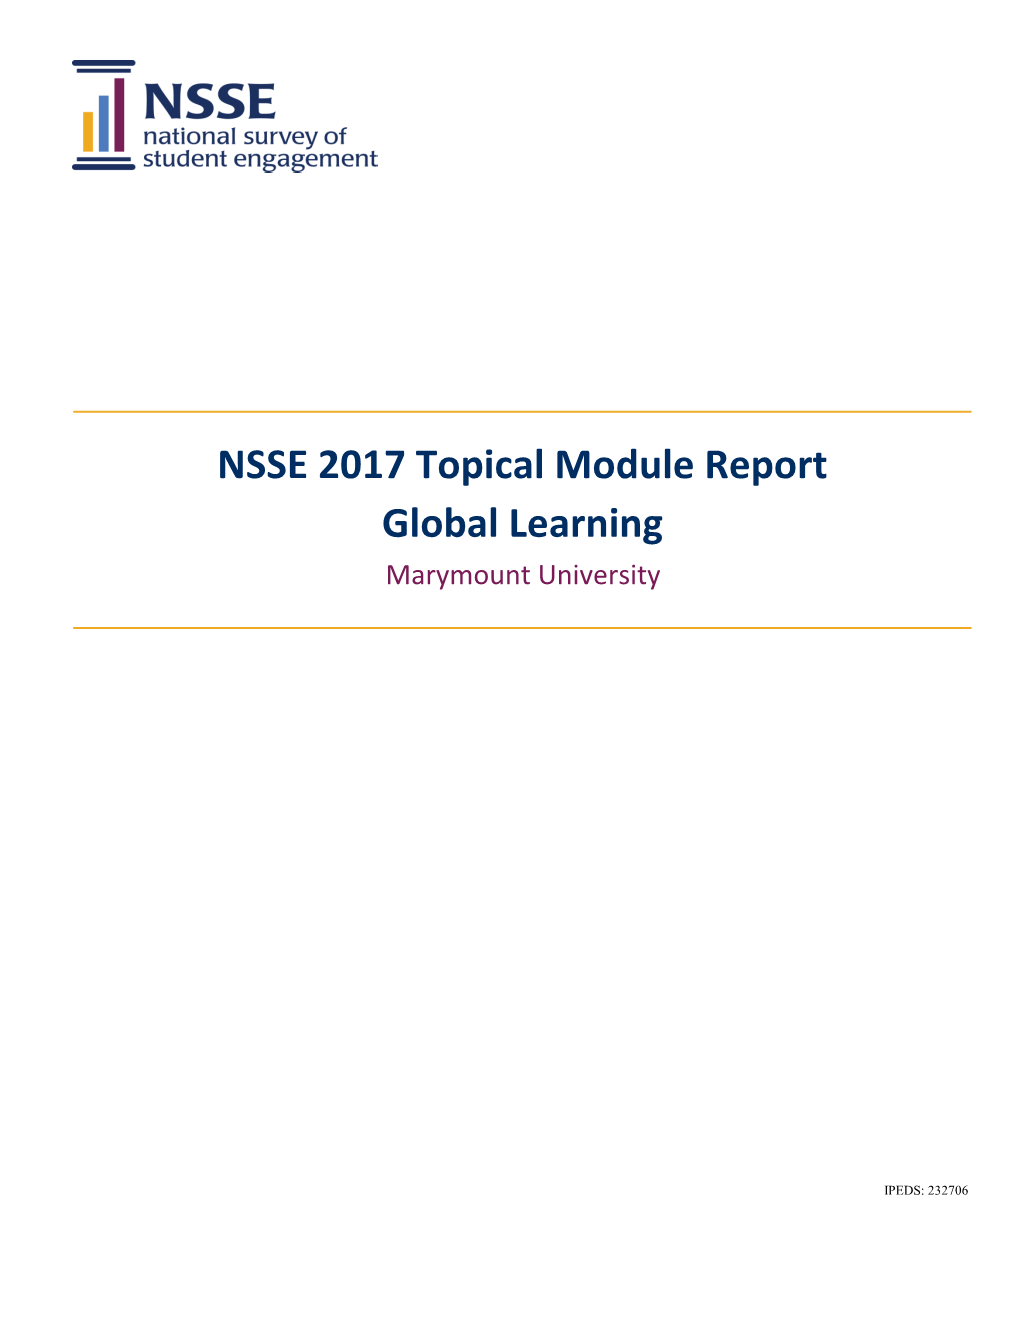 NSSE Global Learning Topical Module